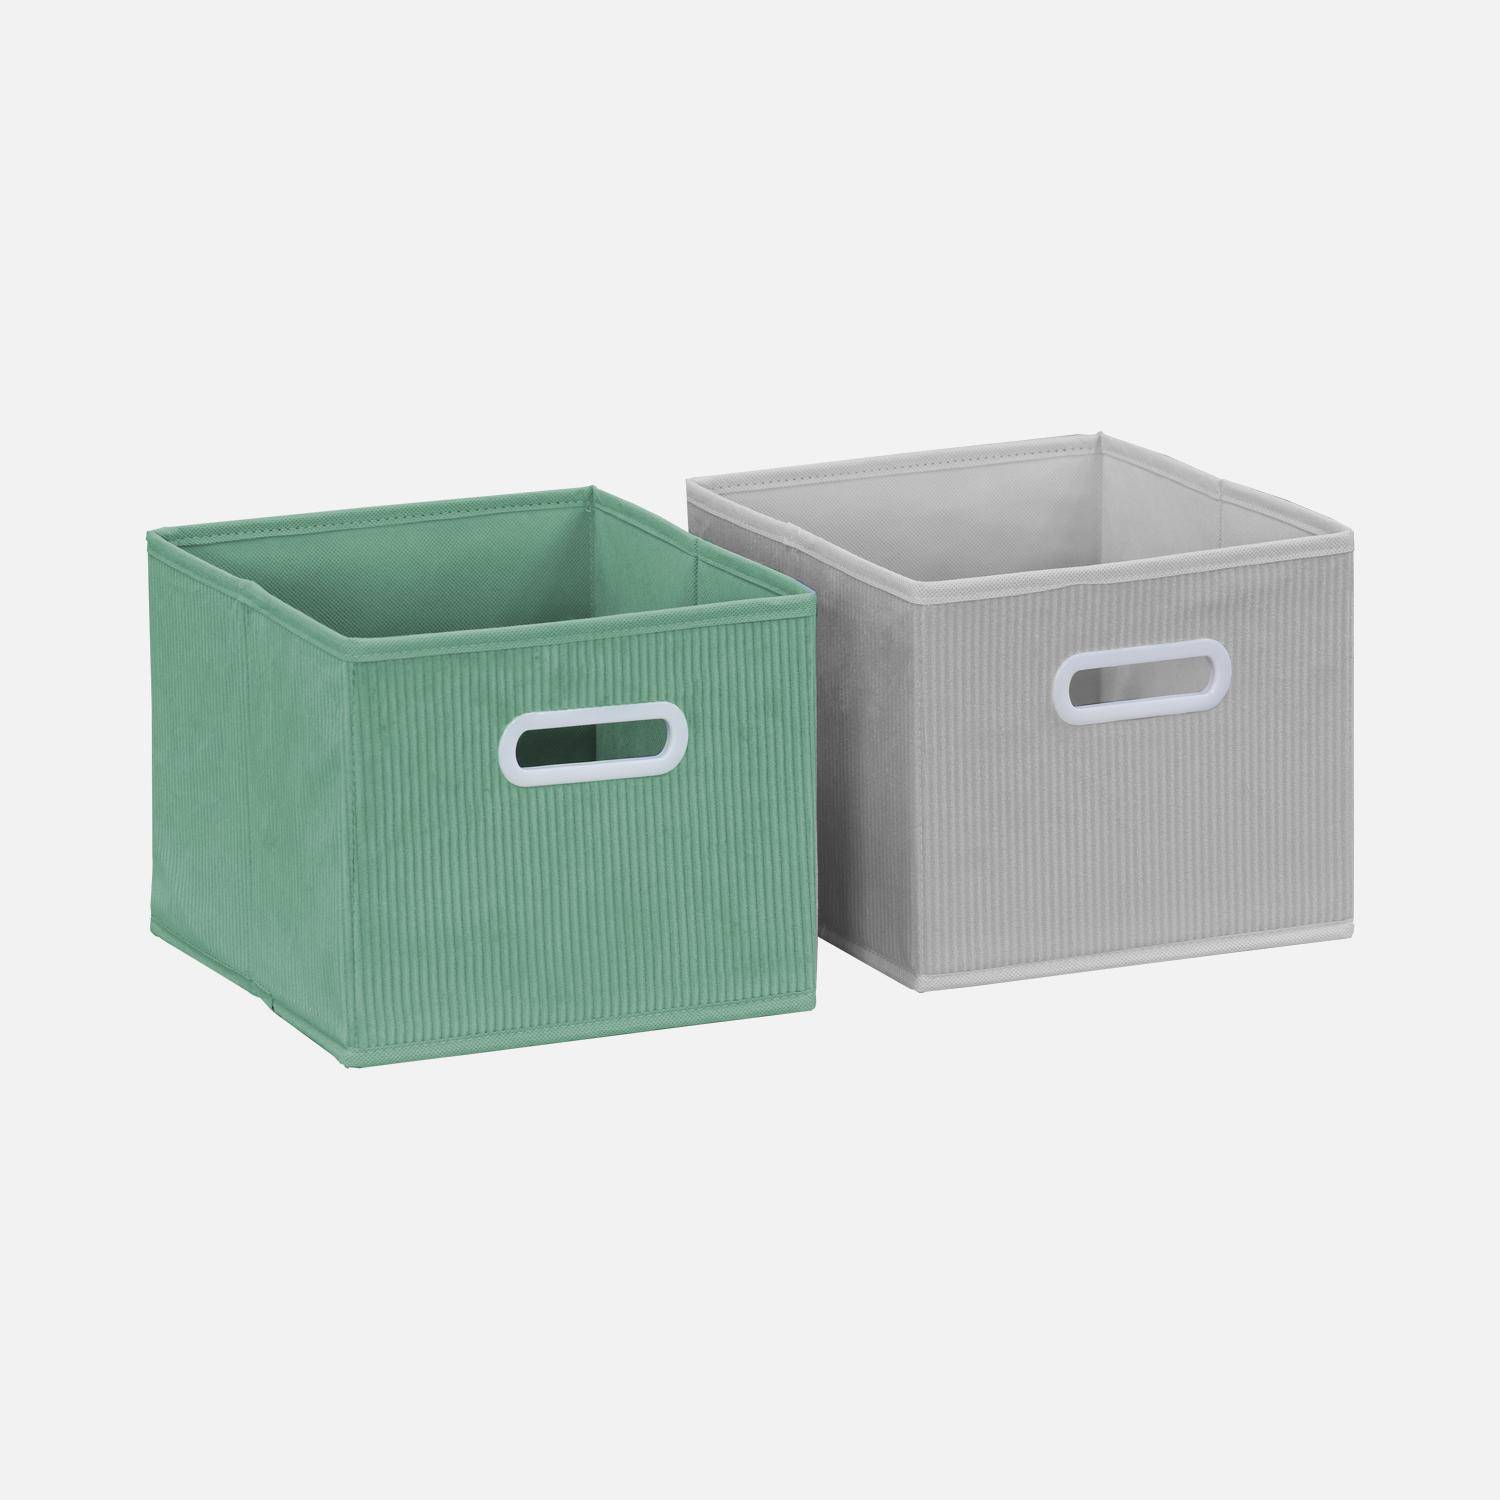 Storage unit for children with 7 compartments, 2 green baskets and 2 grey velvet baskets Photo3